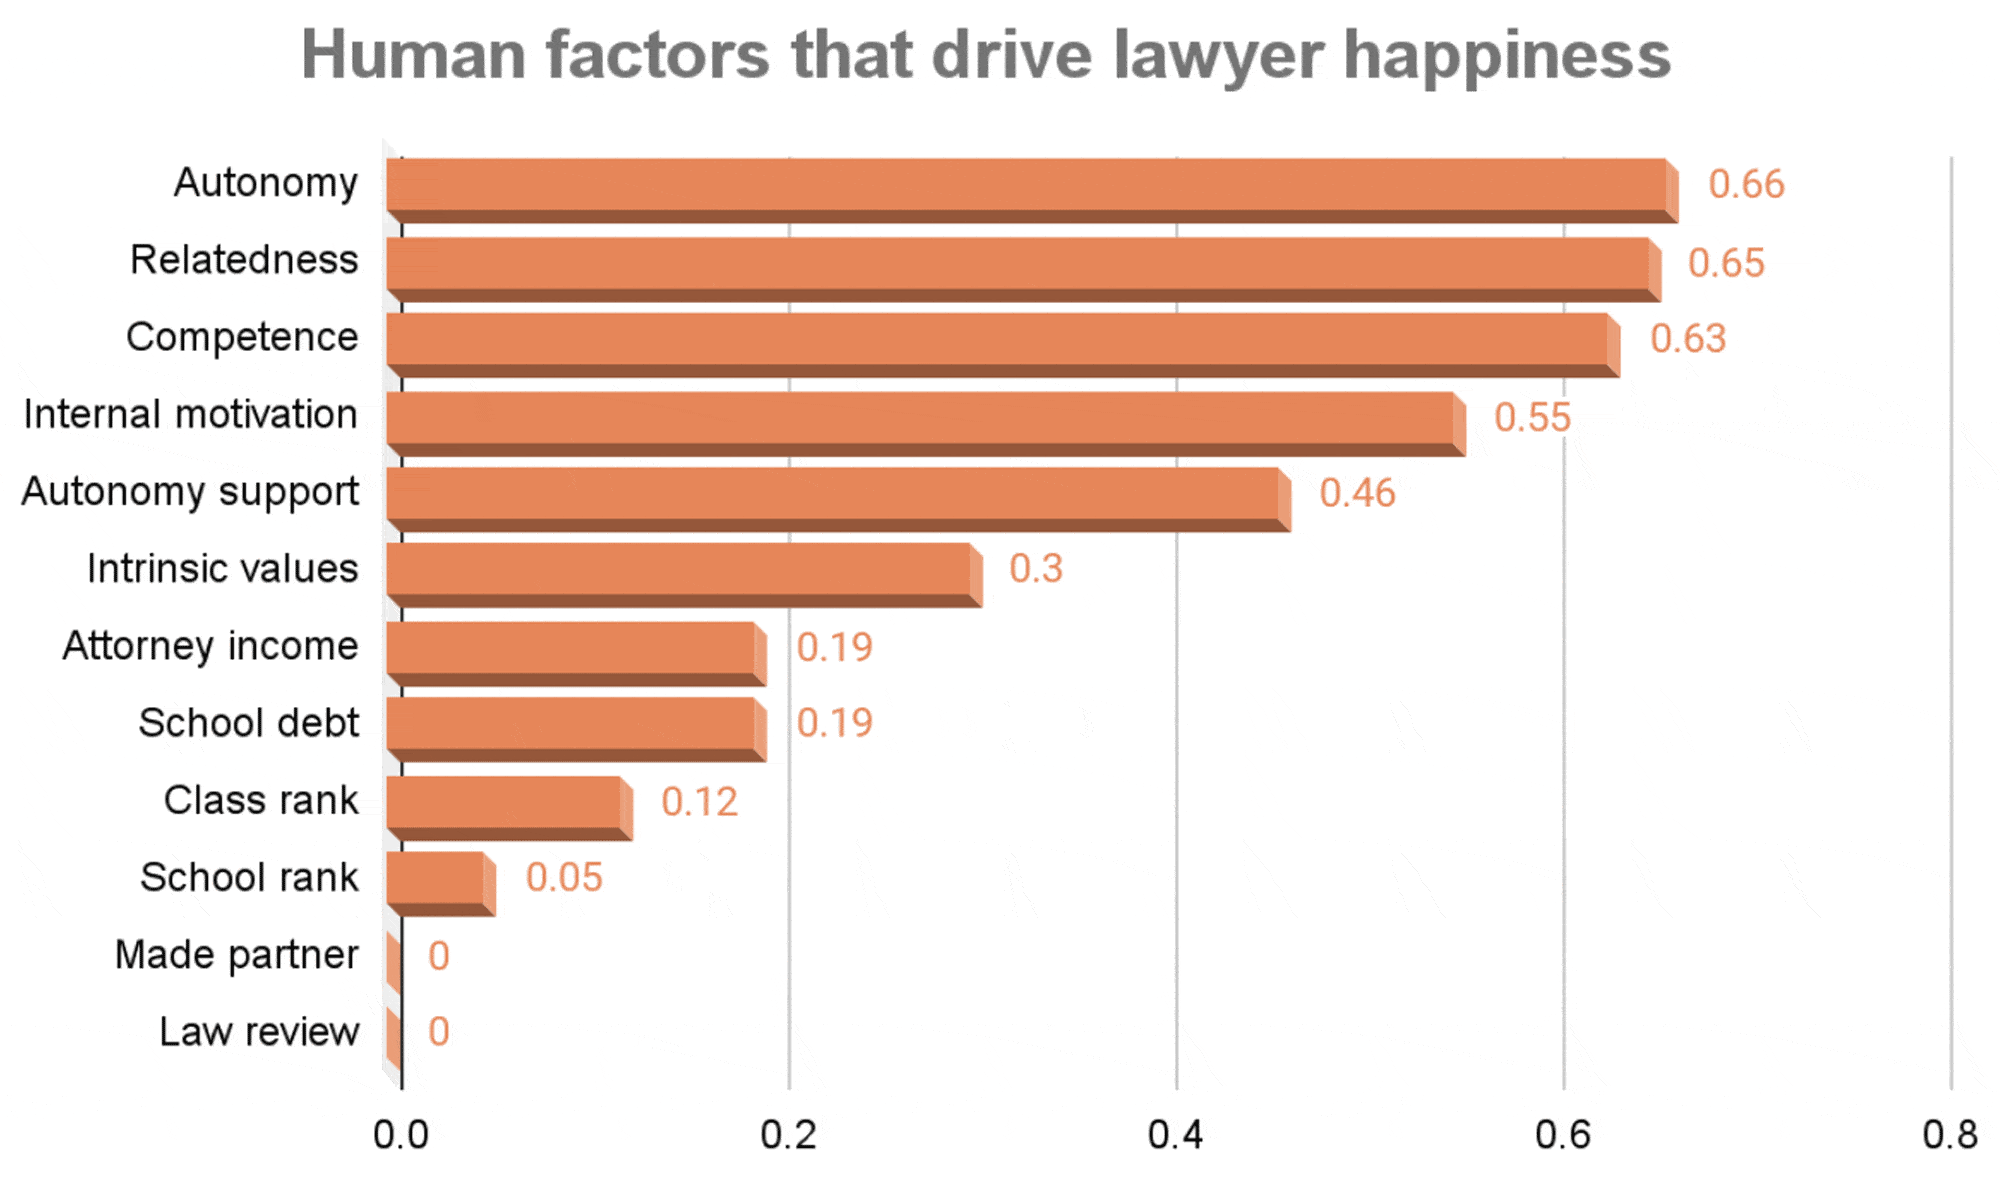 Human Factors that Drive Lawyer Happiness